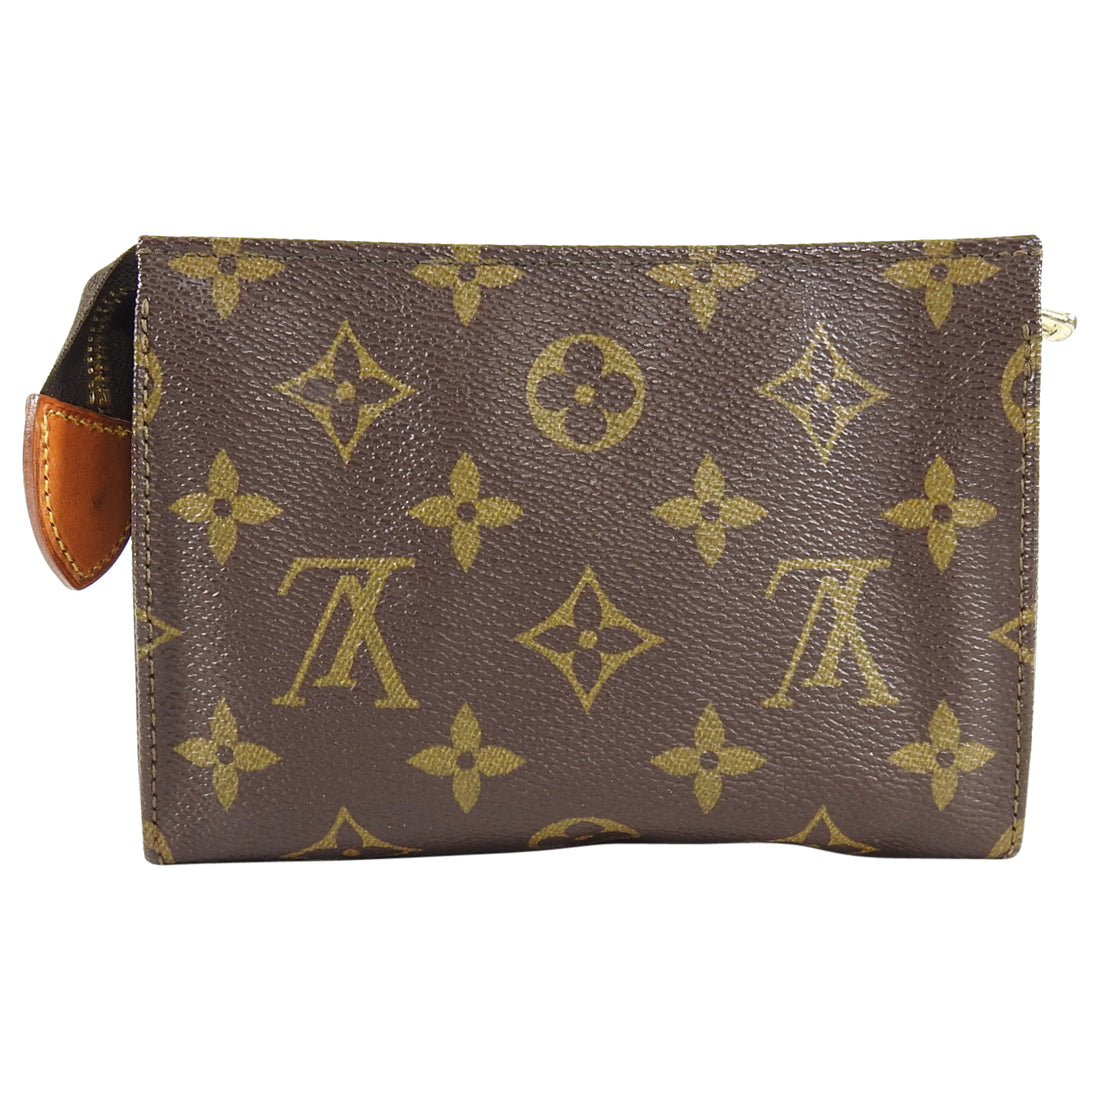 Found a toiletry 15 in store!! But now im second guessing if she is worth  the $480 usd. : r/Louisvuitton